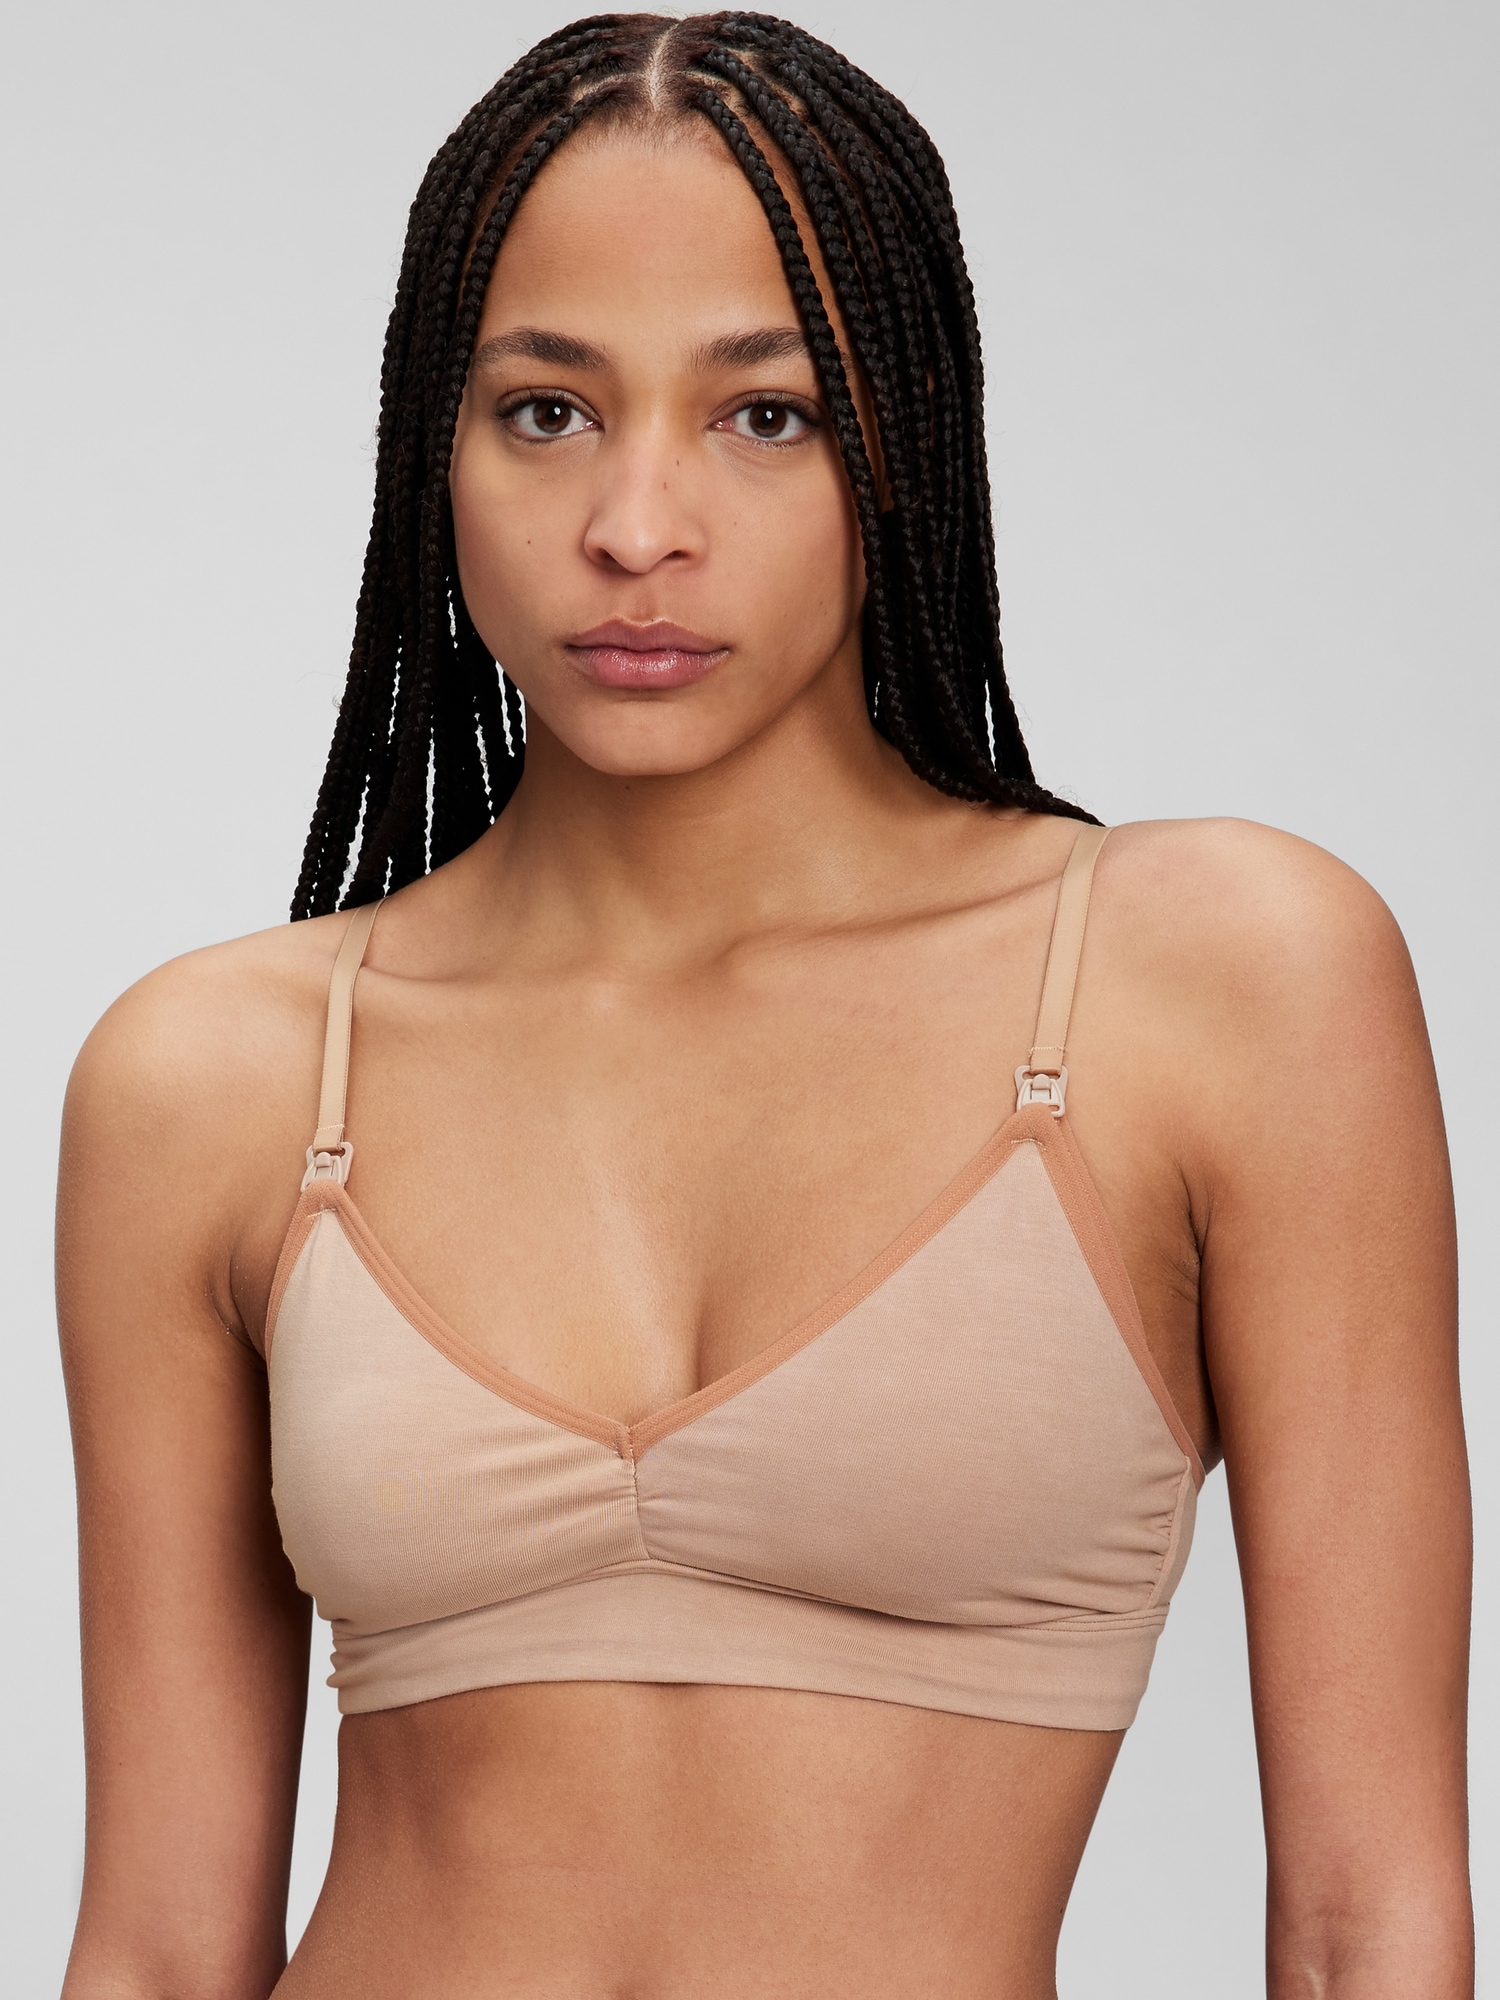 New calin nursing bra without underwiring in organic cotton mix, ivory,  Sans Complexe